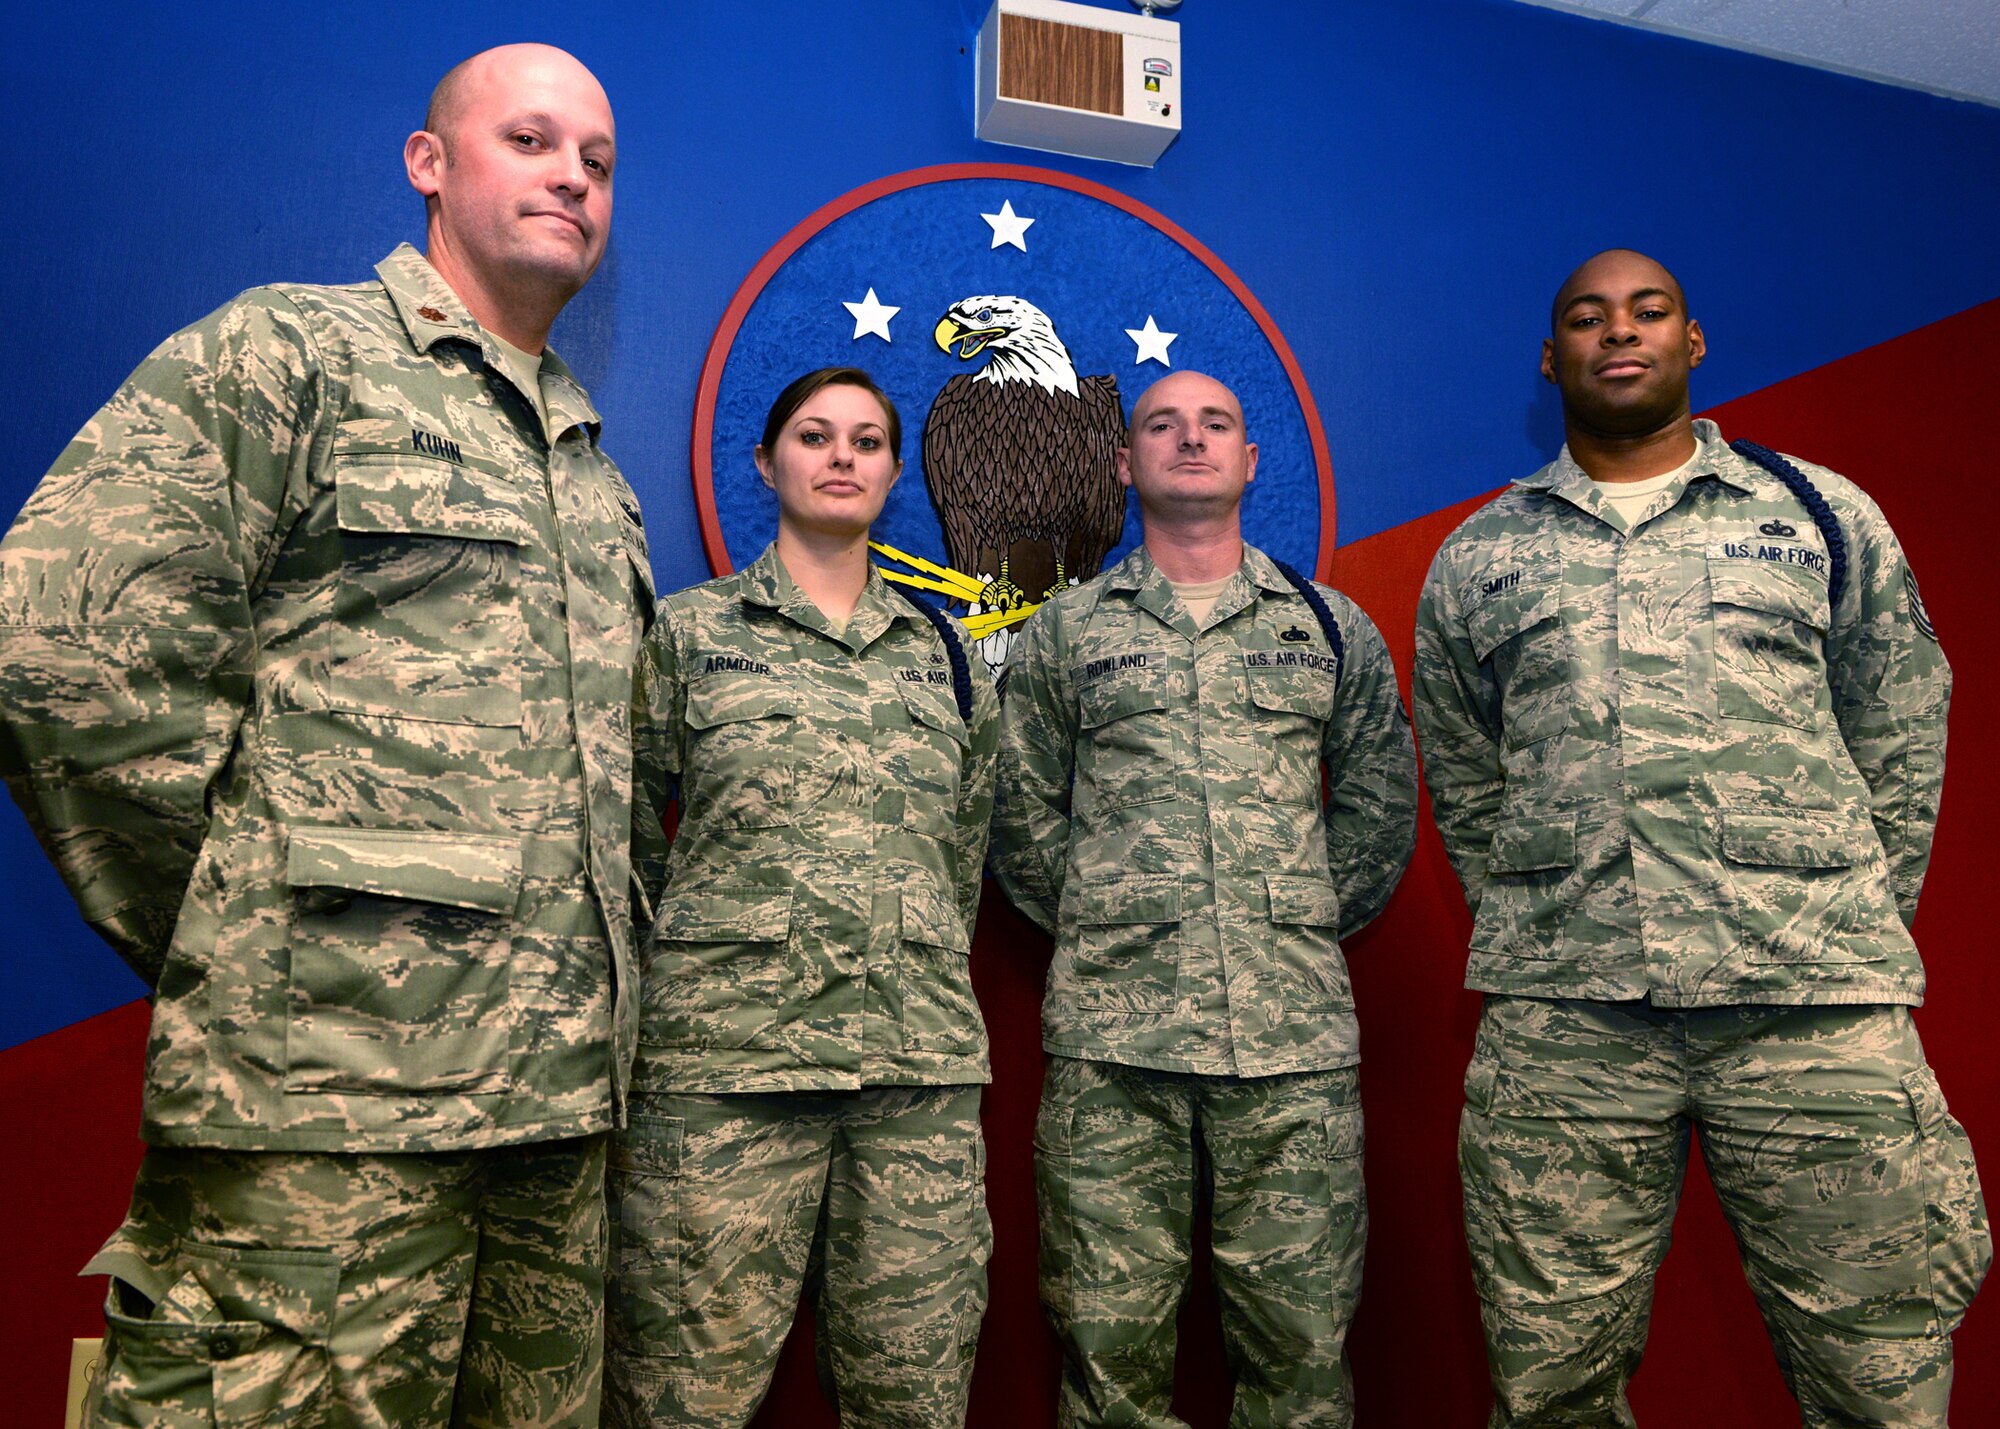 ALTUS AIR FORCE BASE, Okla. – U.S. Air Force Maj. Greg Kuhn, 97th Training Squadron military training flight commander, U.S. Air Force Staff Sgts. Martina Armour and Timothy Rowland, and U.S. Air Force Tech. Sgt. Mark Smith, 97th Training Squadron military training leaders, stand in front of the 97th TRS patch, Dec. 10, 2014. As loadmaster and boom operator students enter their technical training at Altus Air Force Base, they rely on this small group of military training leaders to help with issues and uphold military standards. (U.S. Air Force photo by Airman 1st Class Nathan Clark/Released)